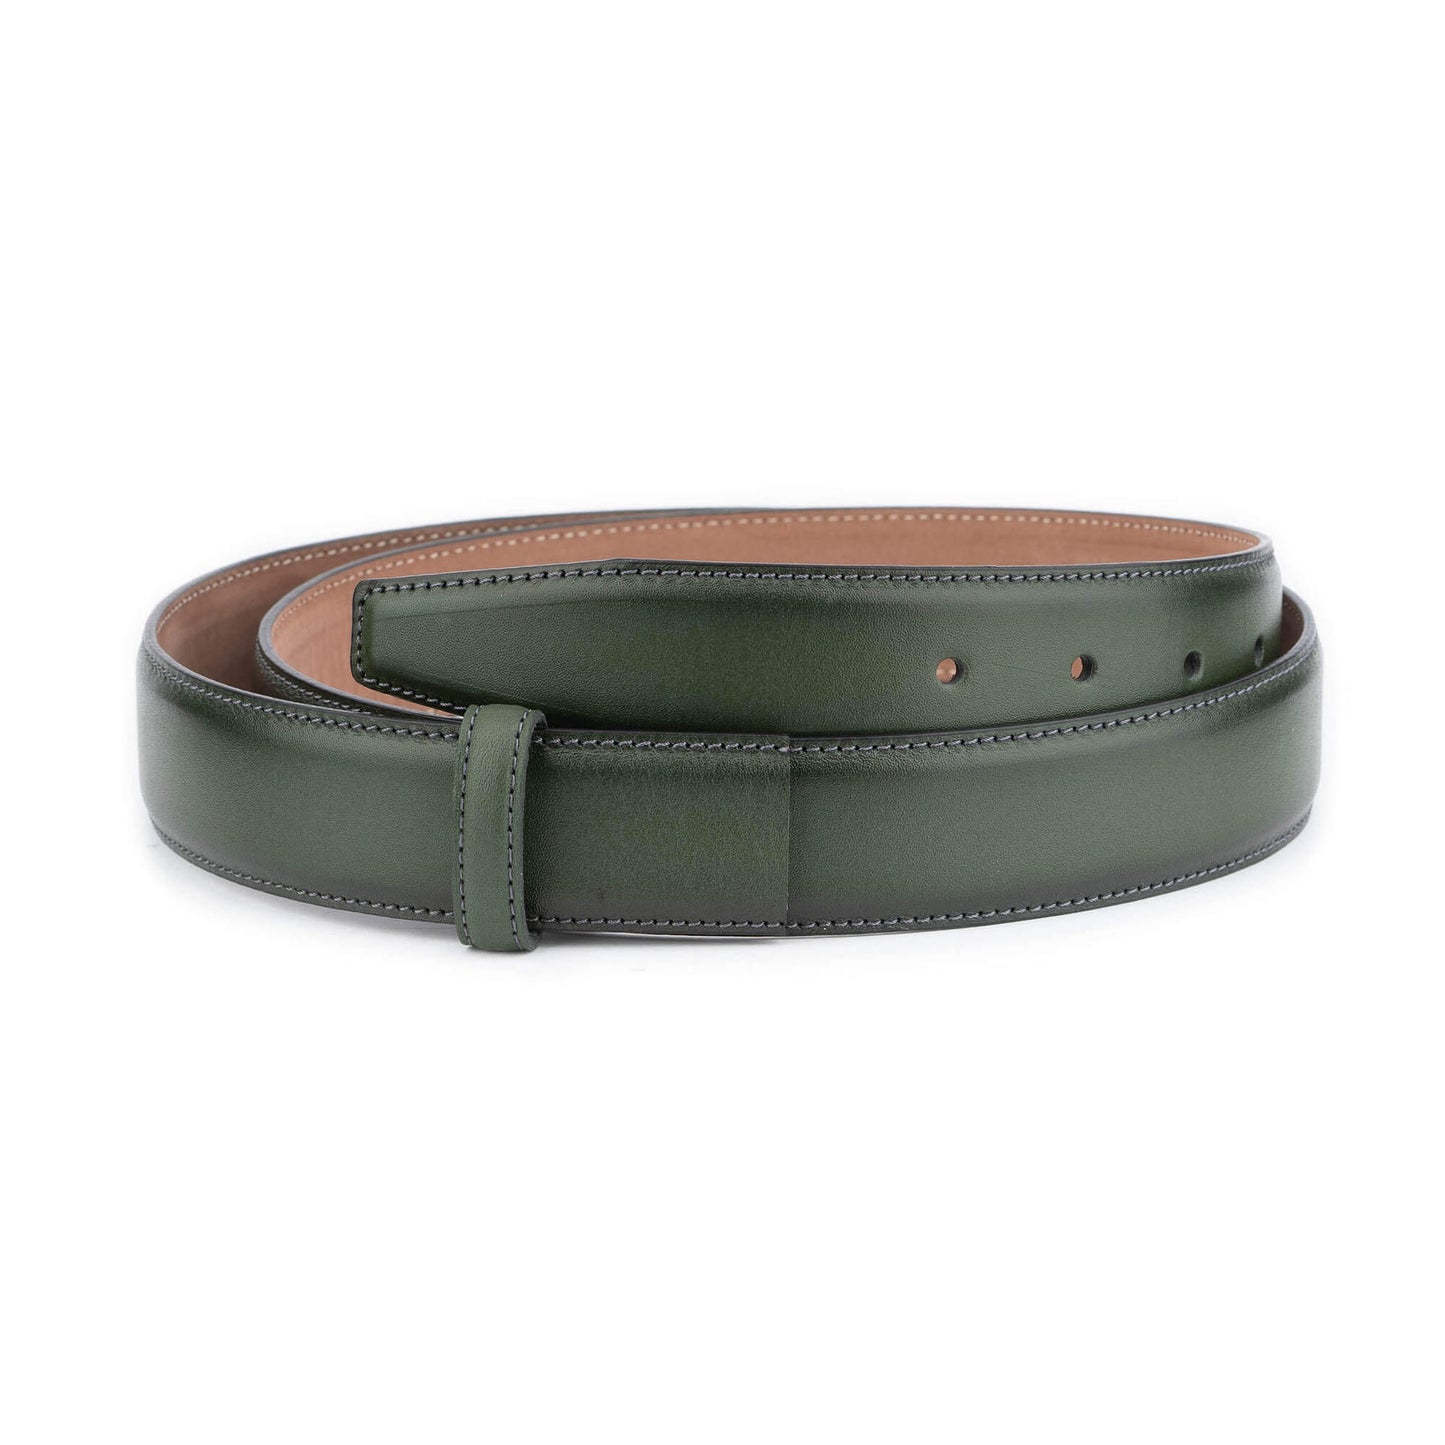 Olive Green Leather Strap For Montblanc Womens Belt Buckle Replacement